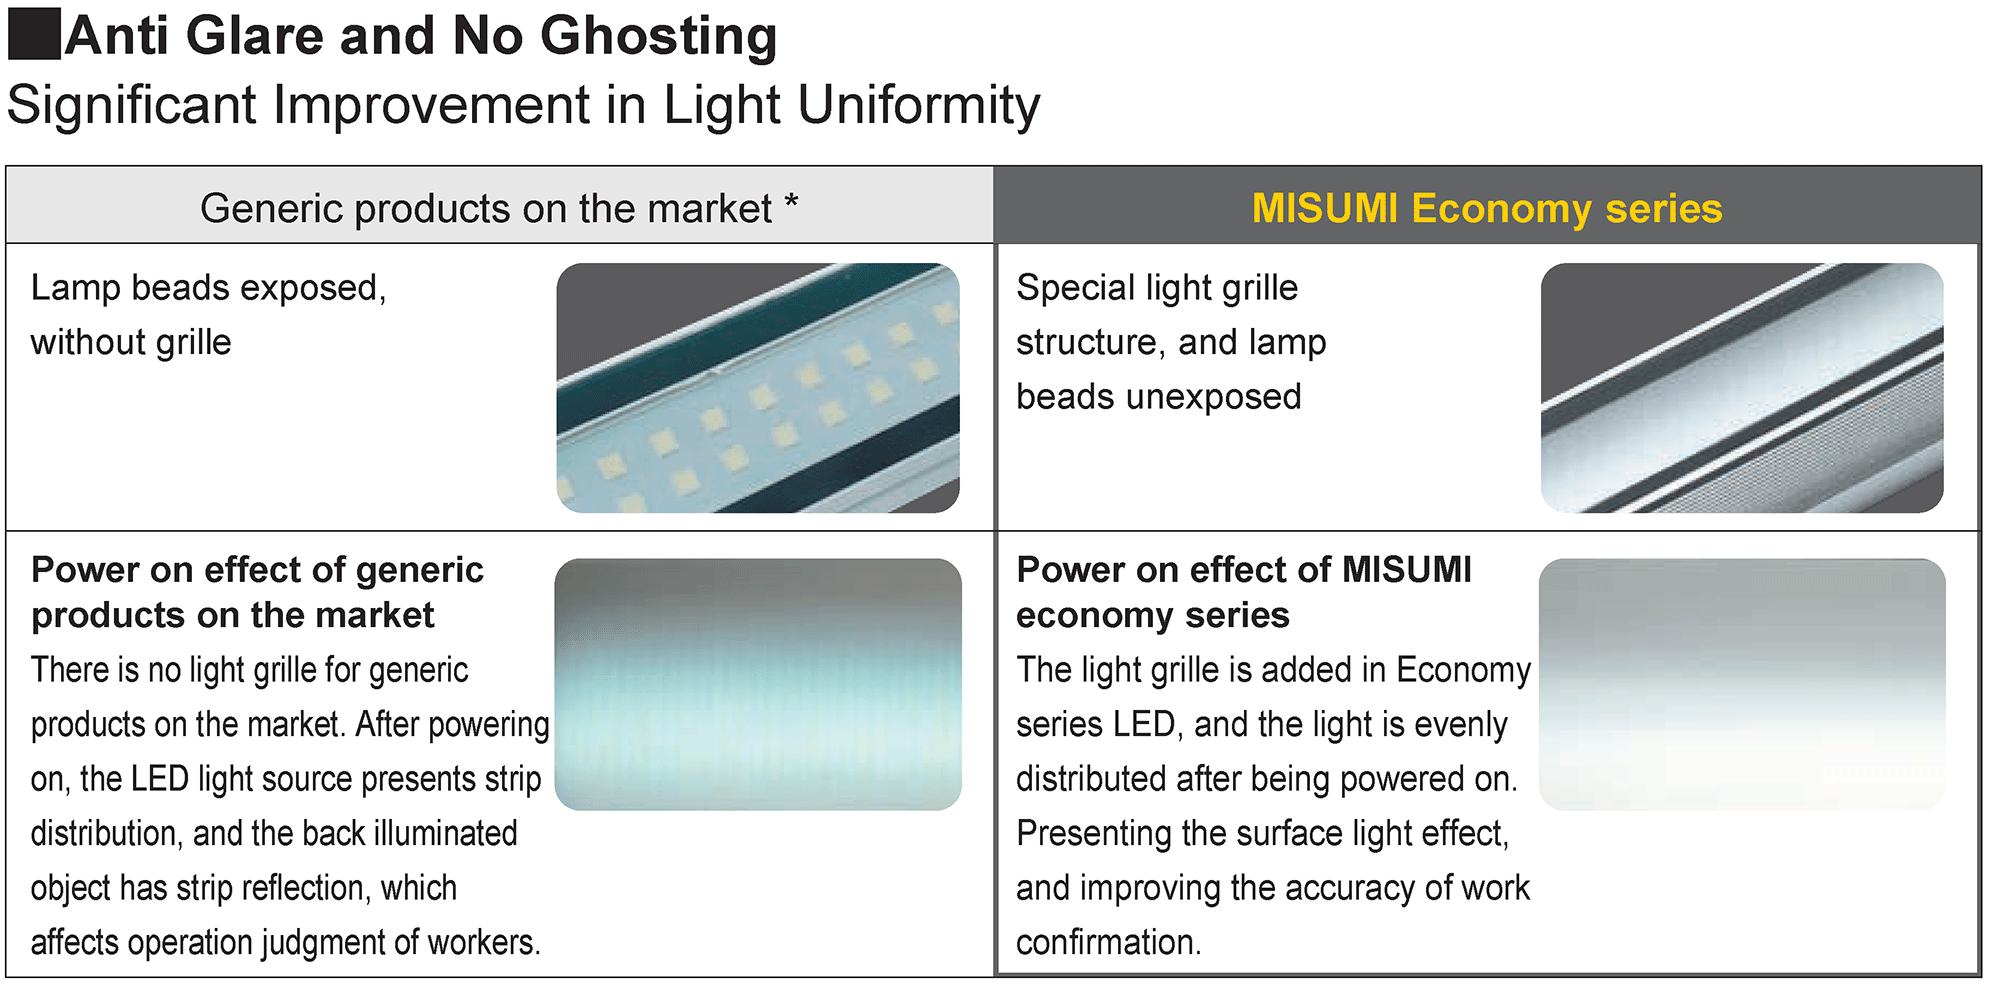 Characteristics of Economy series LED products